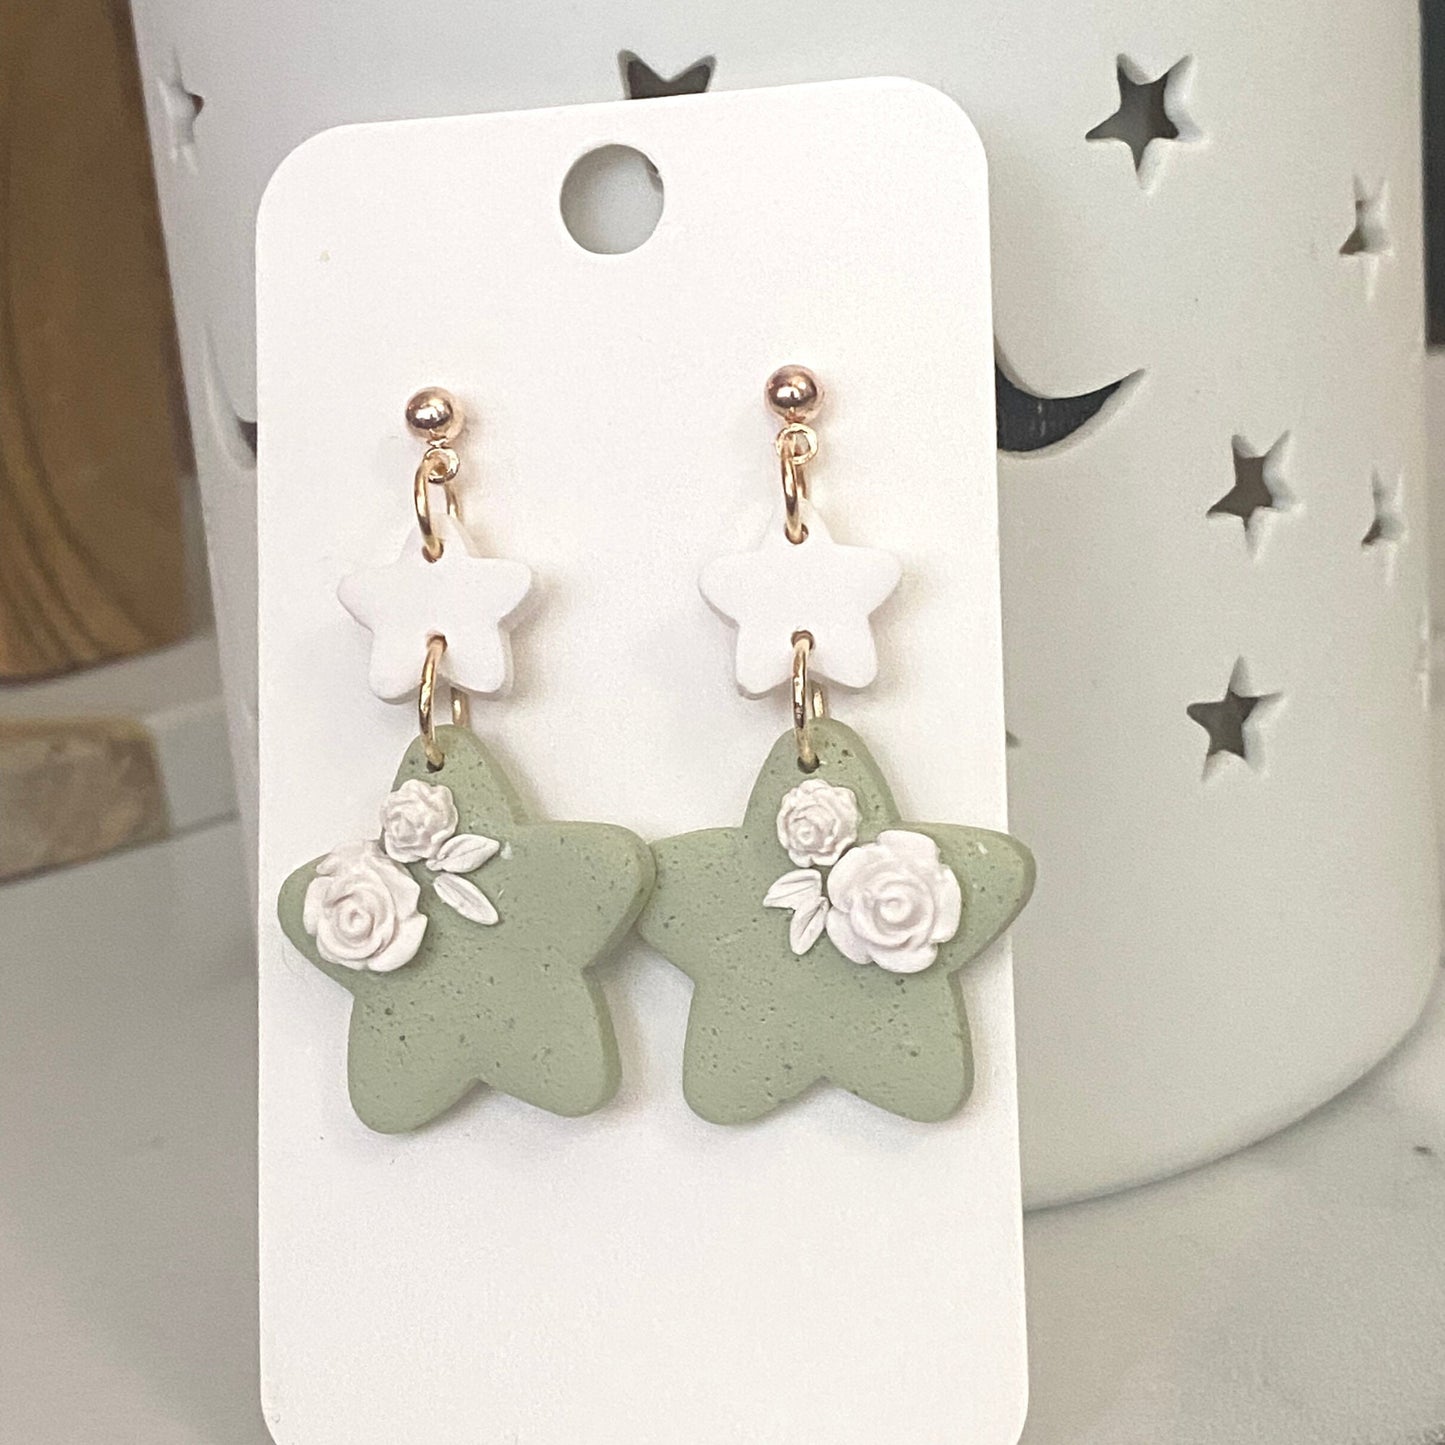 The Star and Rose | Handmade Polymer Clay Earrings